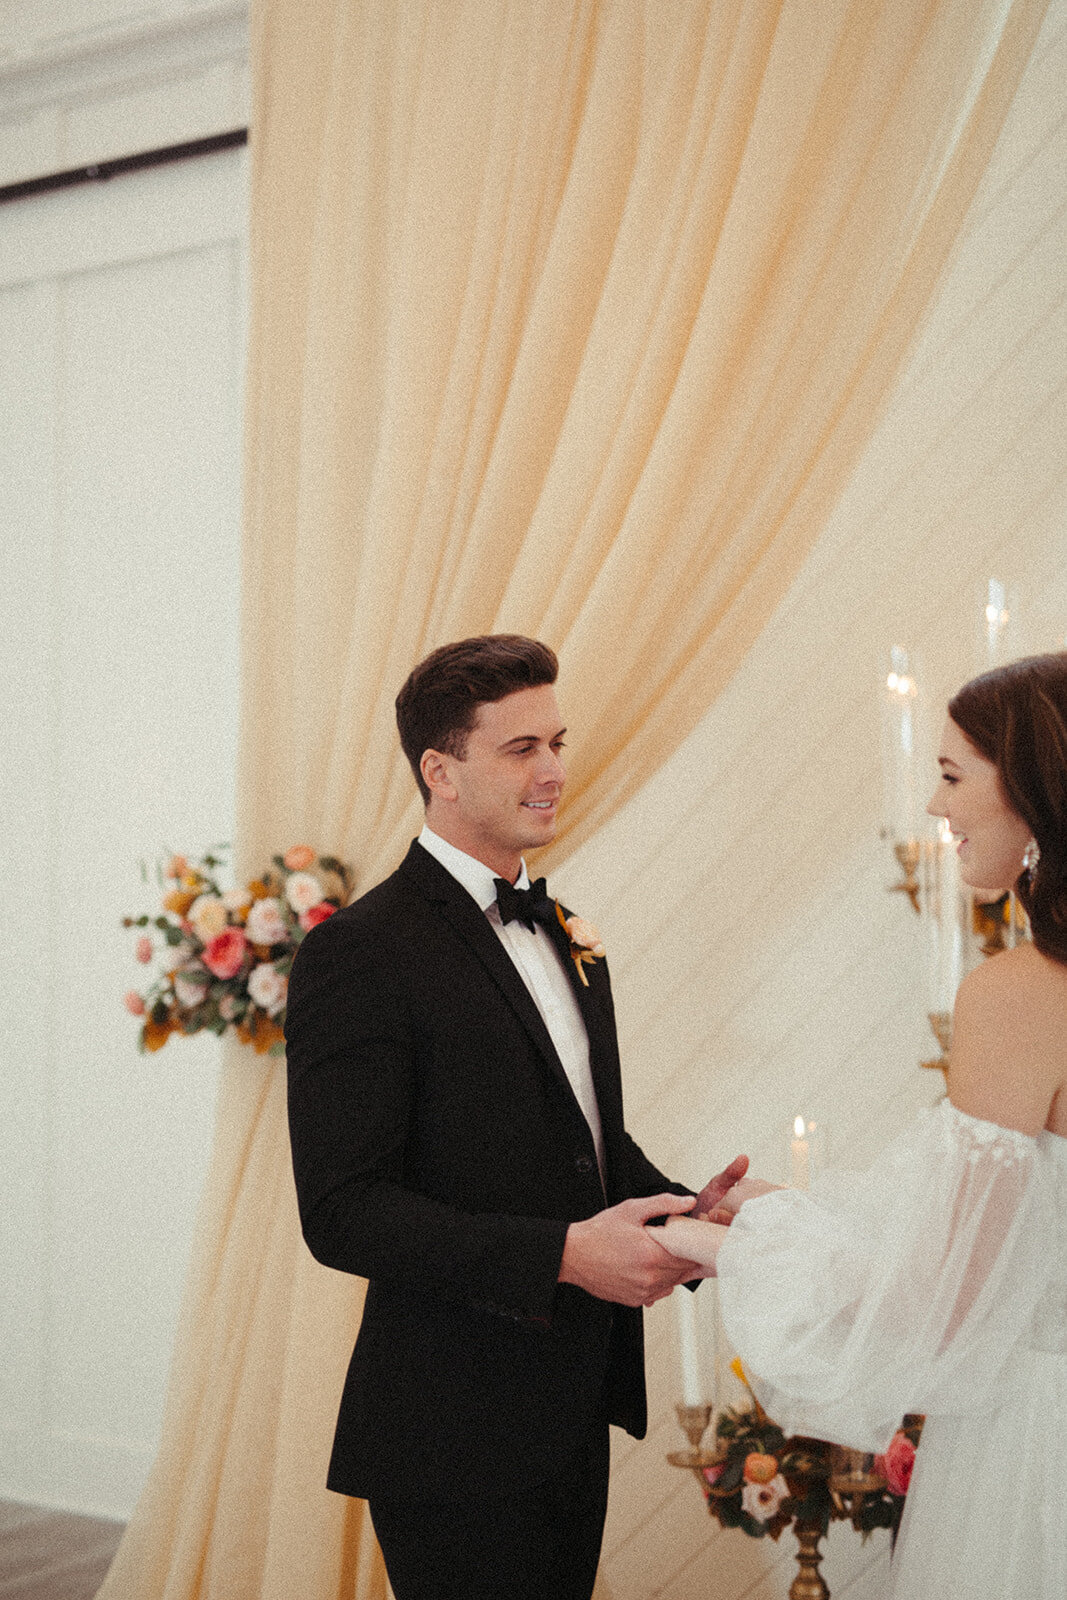 A groom wearing a black tuxedo holds bride wearing a white wedding gown by the hands in front of peach curtains.